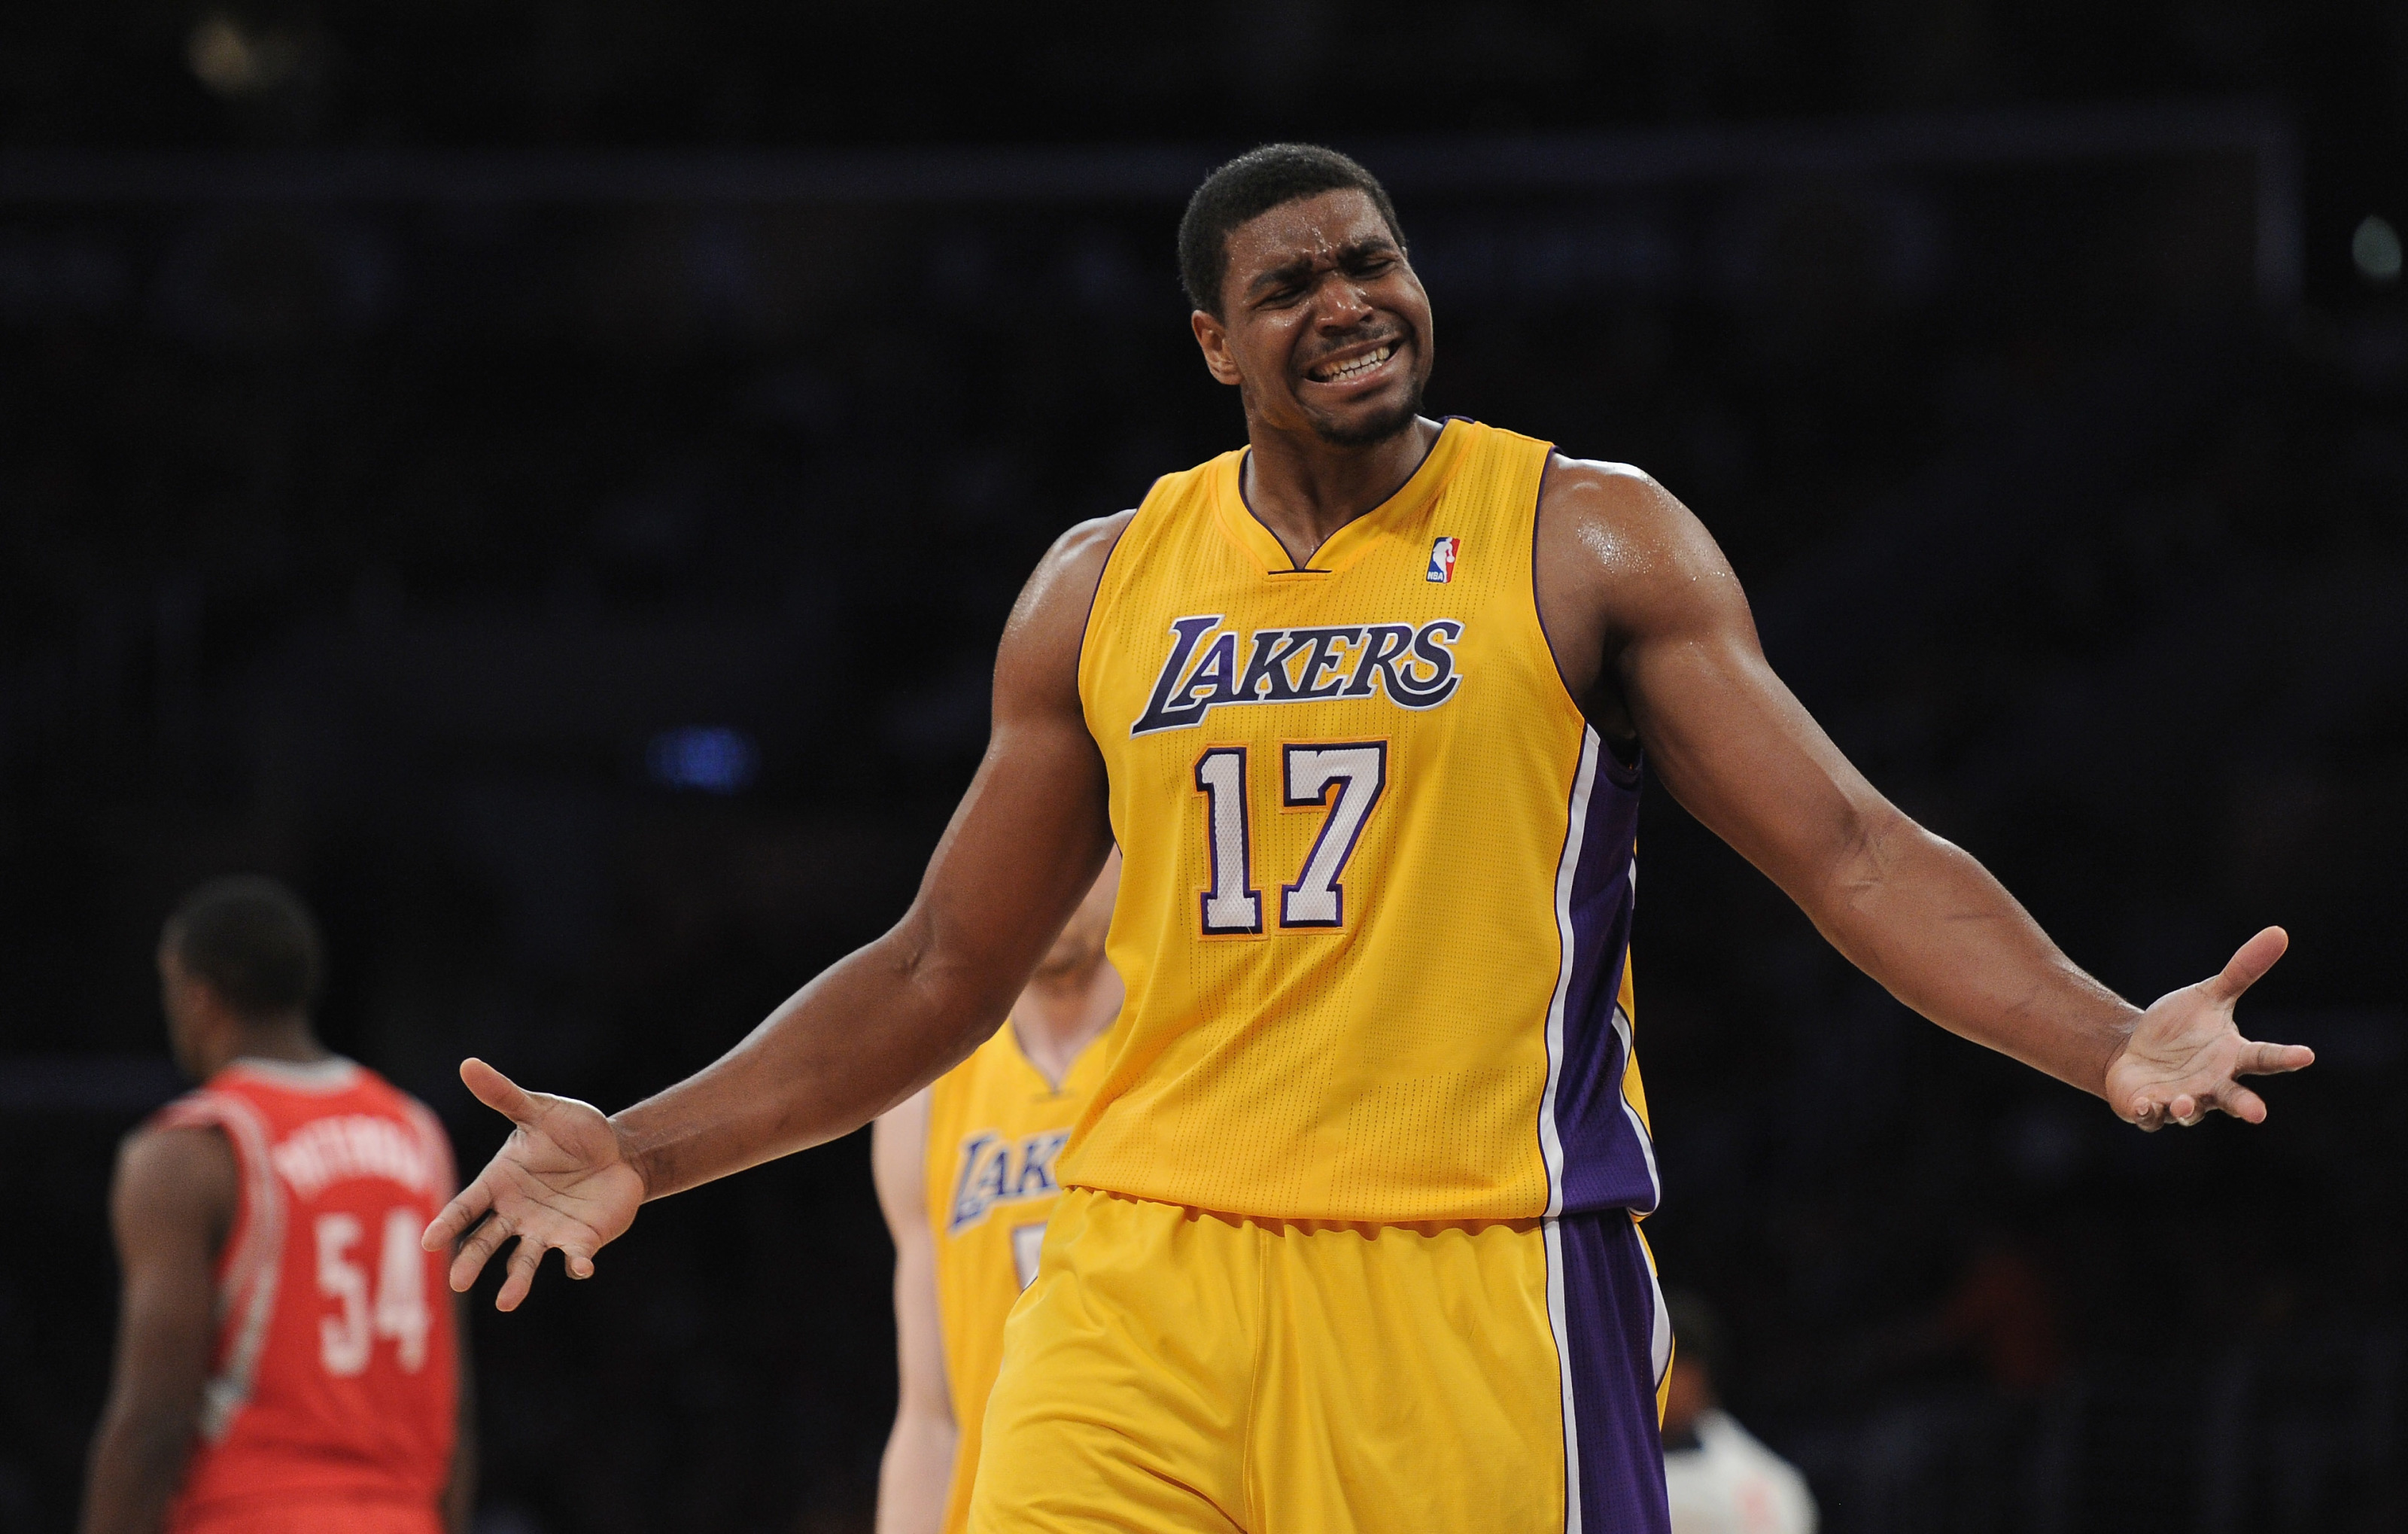 Bynum's return to Lakers may be month away - Los Angeles Times